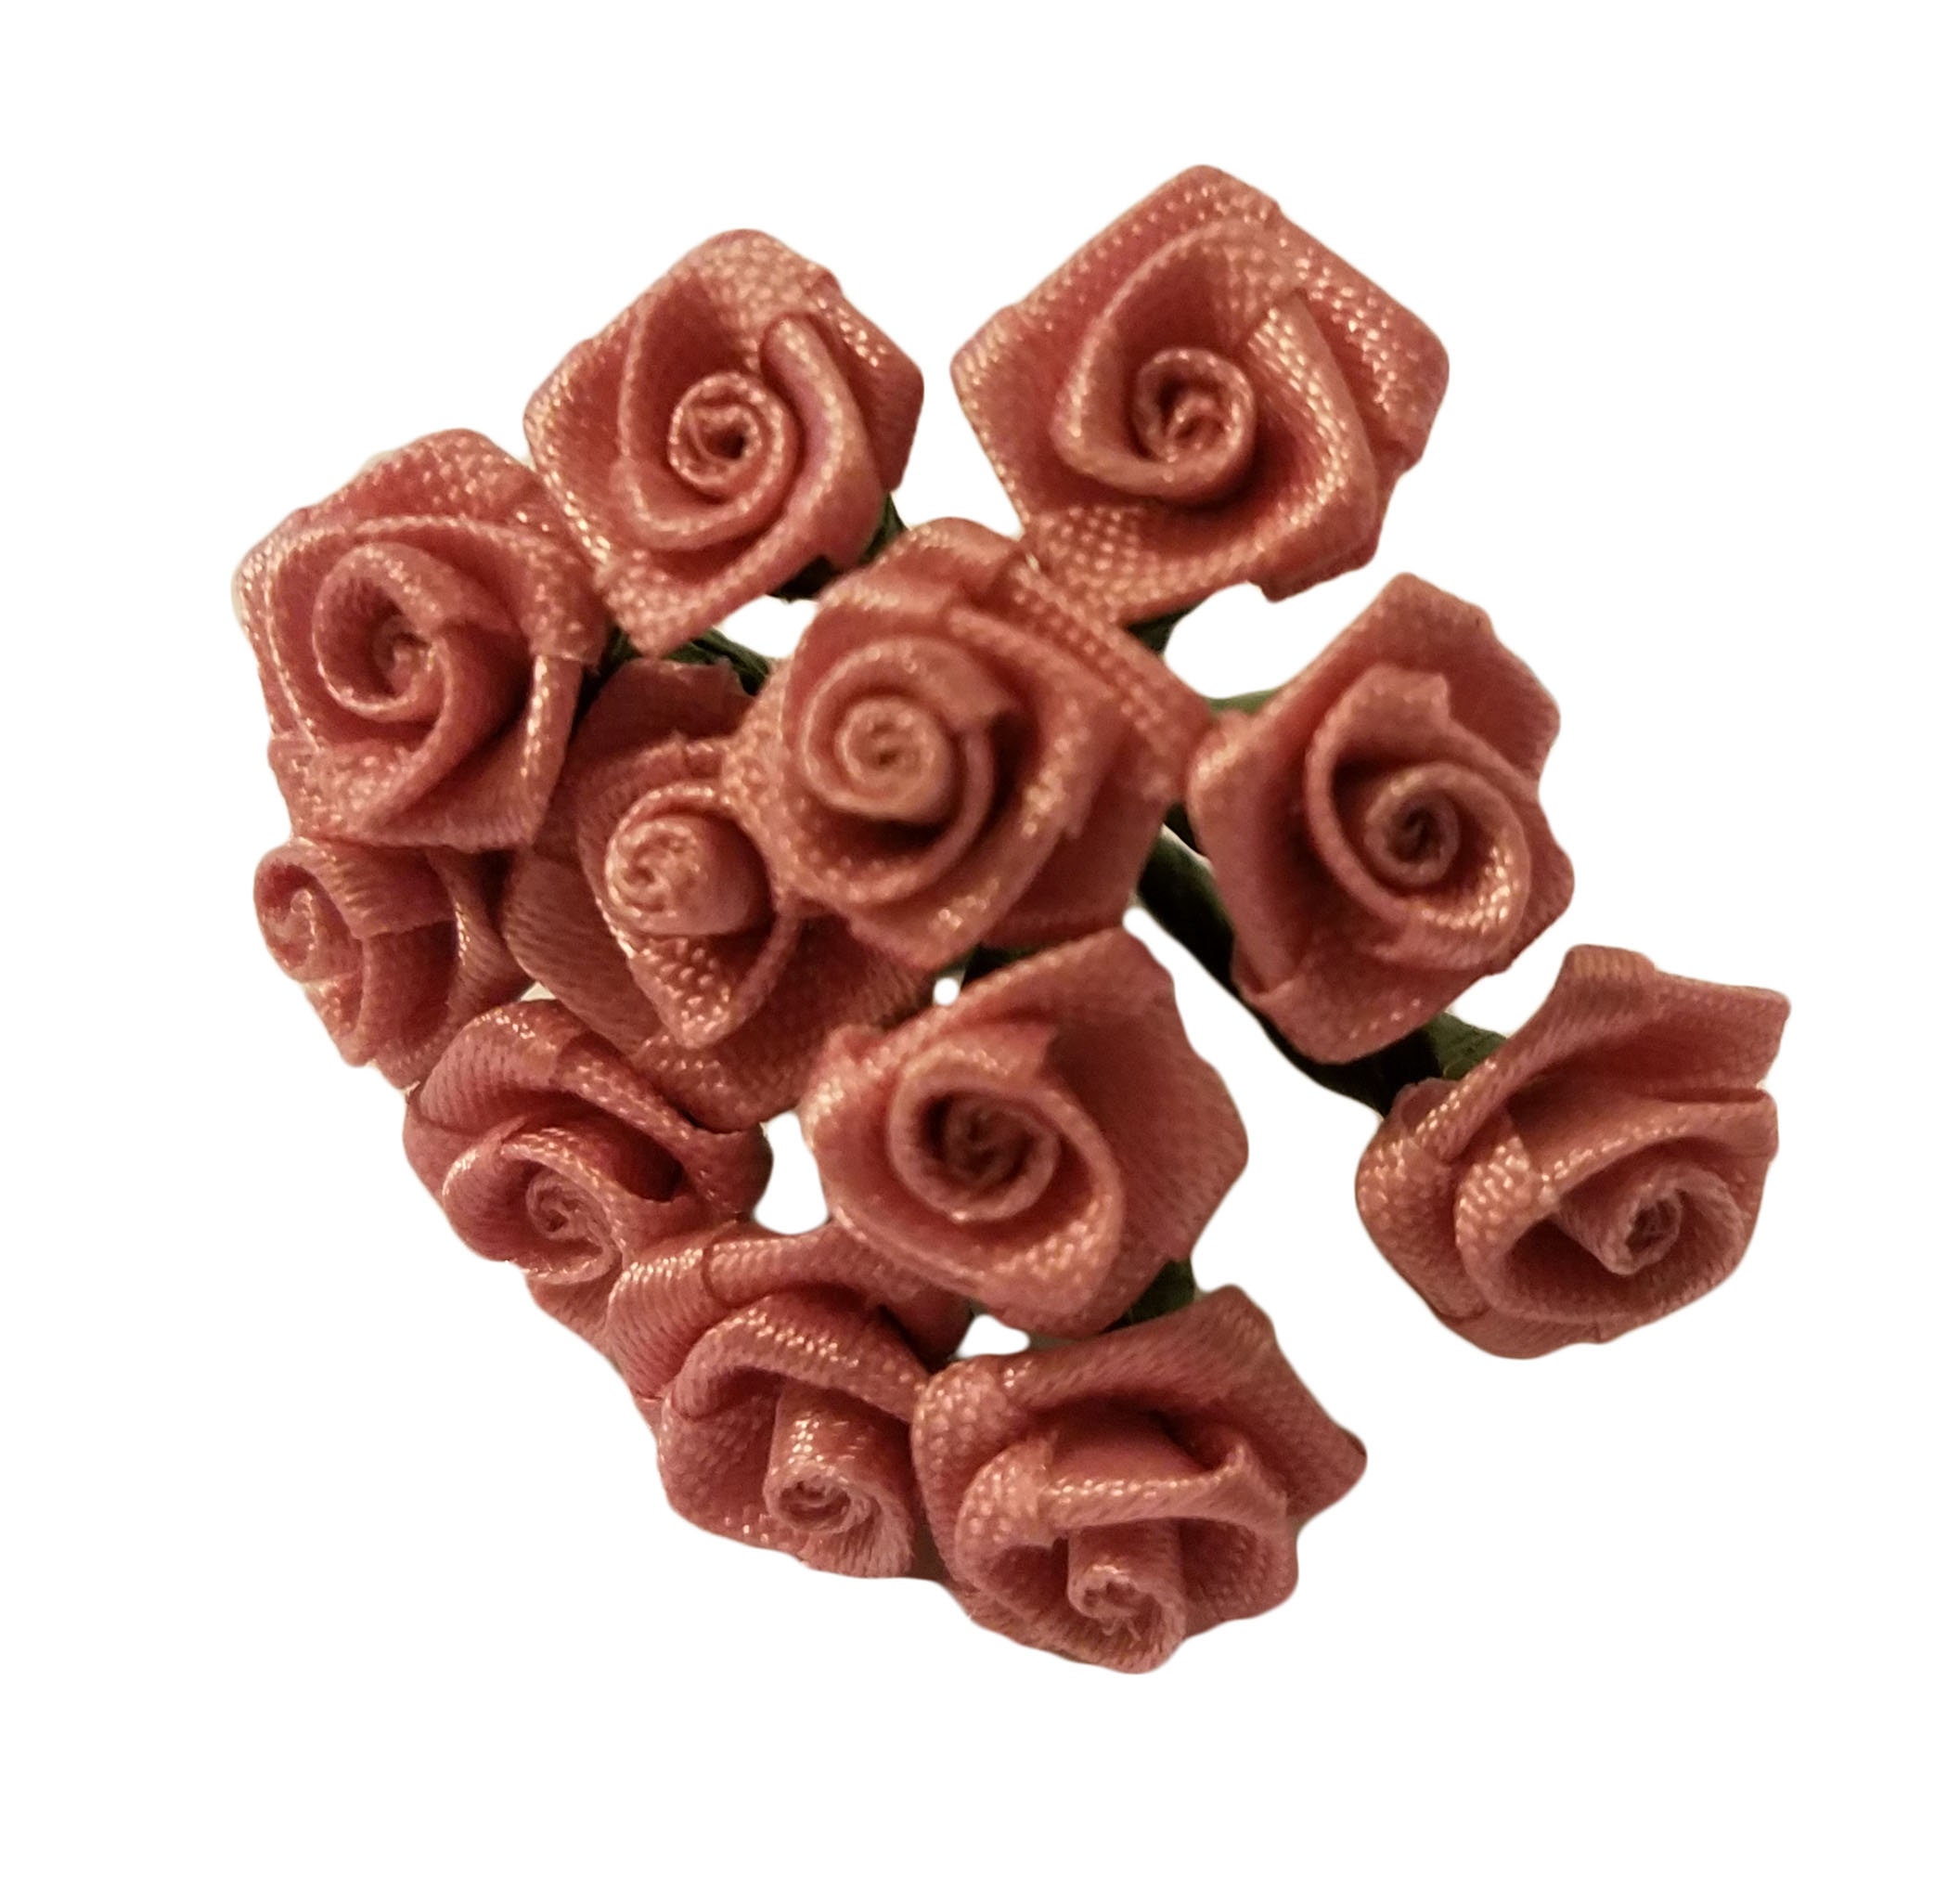 300 Pcs Mini Flower Craft Mini Satin Ribbon Rose Cute Tiny Craft Roses Small  Fabric Flowers for Crafts Multicolor Small Rosette for Crafts, DIY, Sewing,  Wedding, Bride Gift Wrapping Decoration - Yahoo Shopping